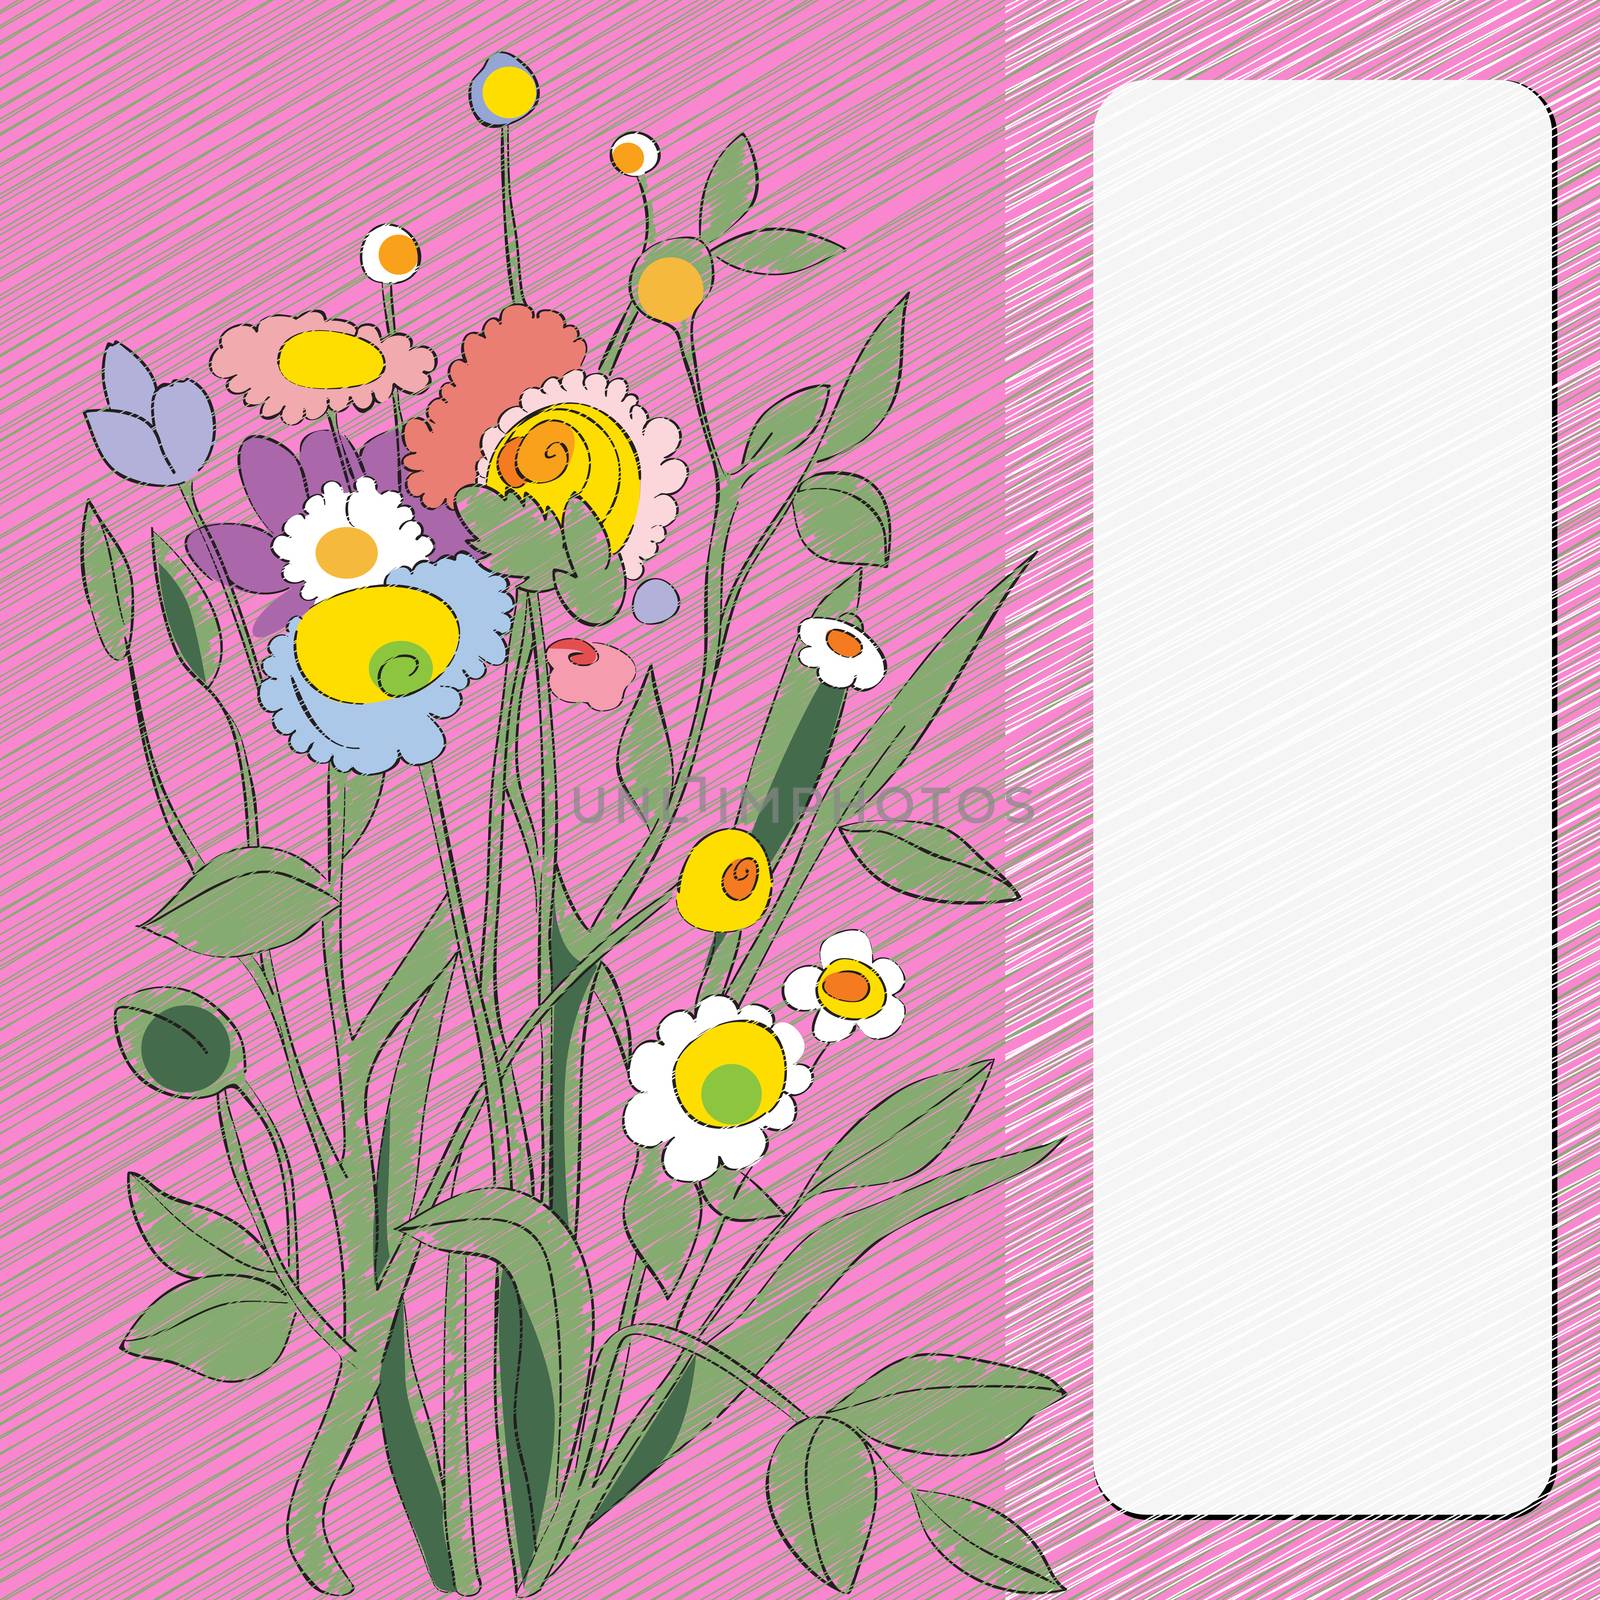 Flowers card, multicolored hand drawn illustration of a floral bouquet over a scribbled background